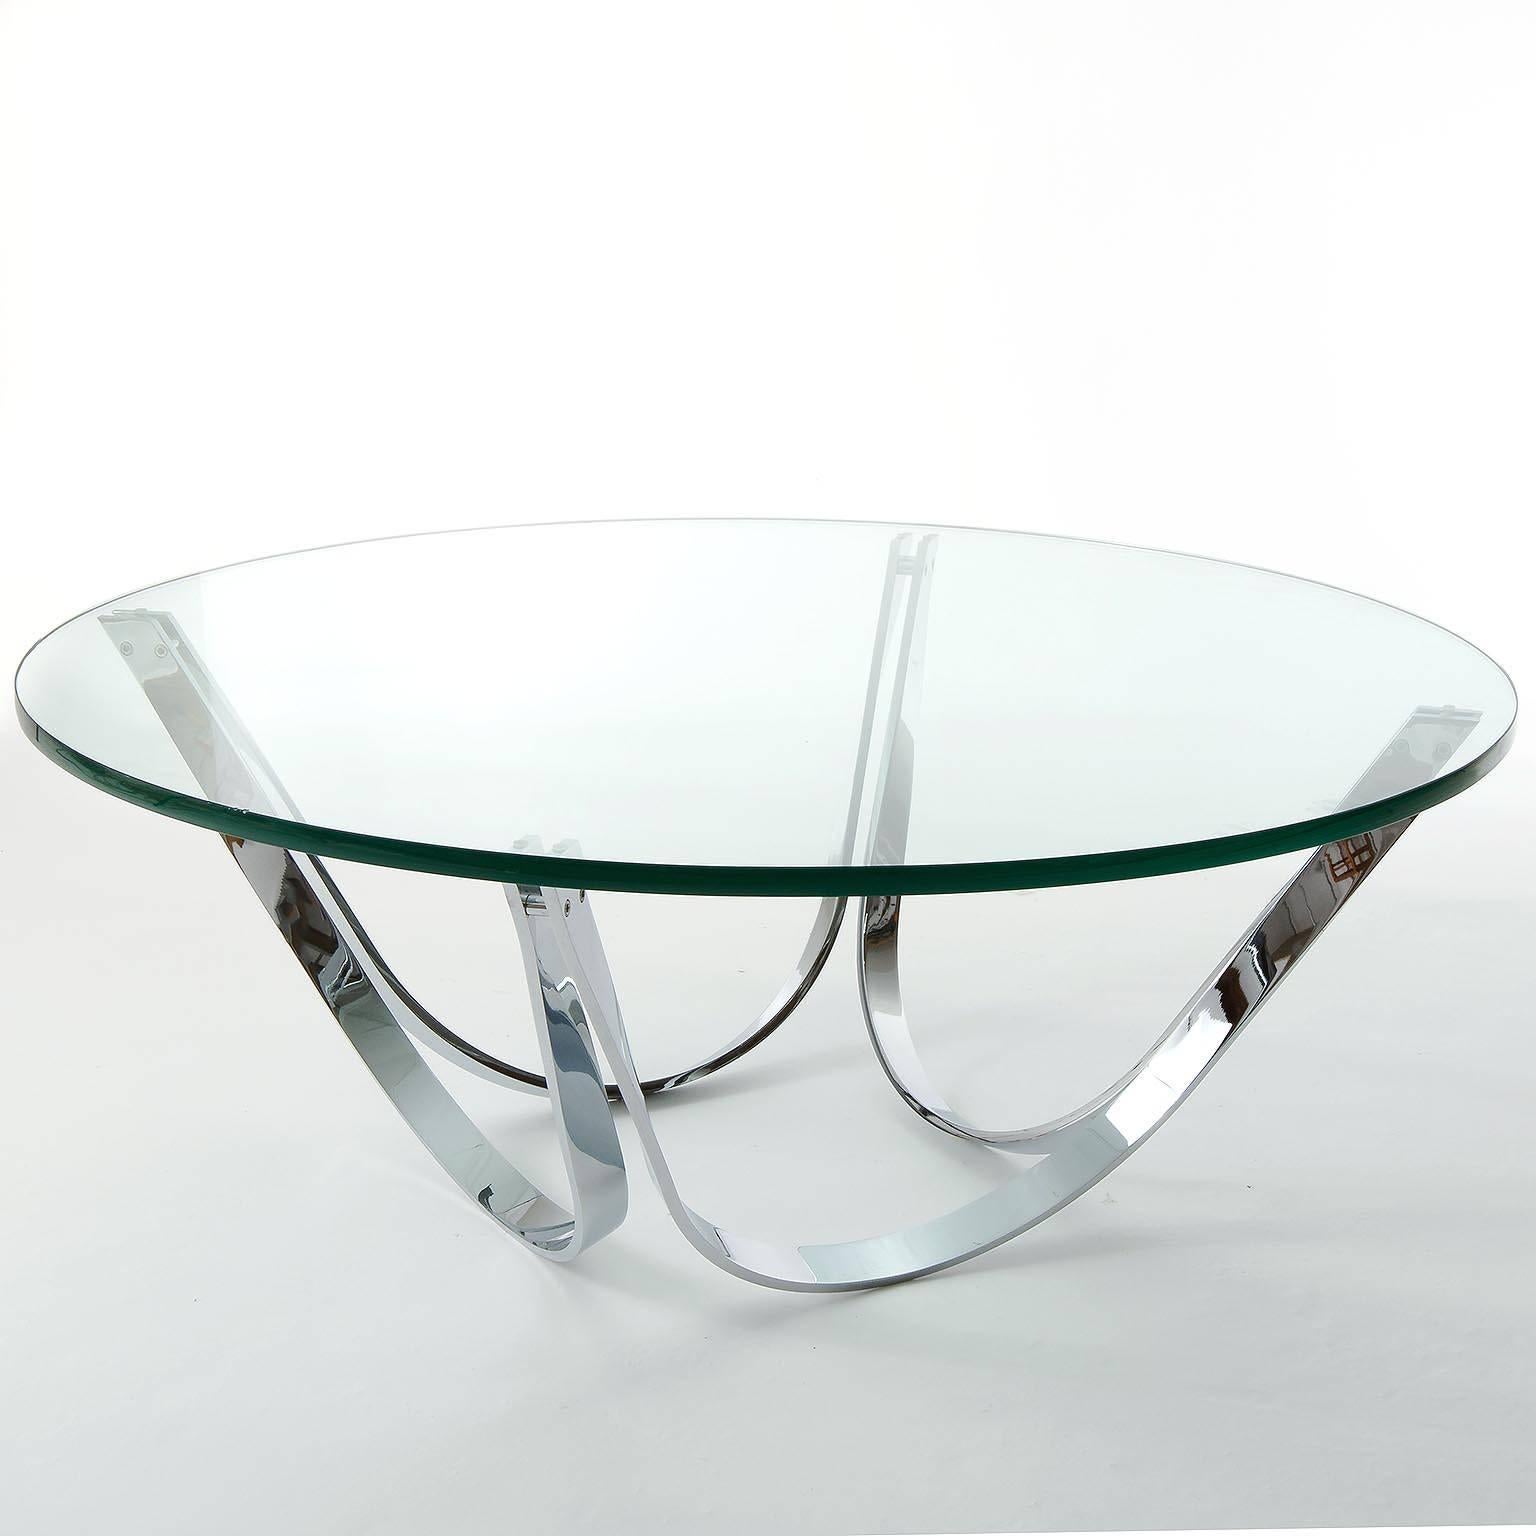 Two Roger Sprunger cocktail tables for Tri-Mark, manufactured in Mid-Century in 1970s.
A round glass top on a polished chrome base. The base can be flipped over to be used either way. 
The price is per table. They will be sold individually or as